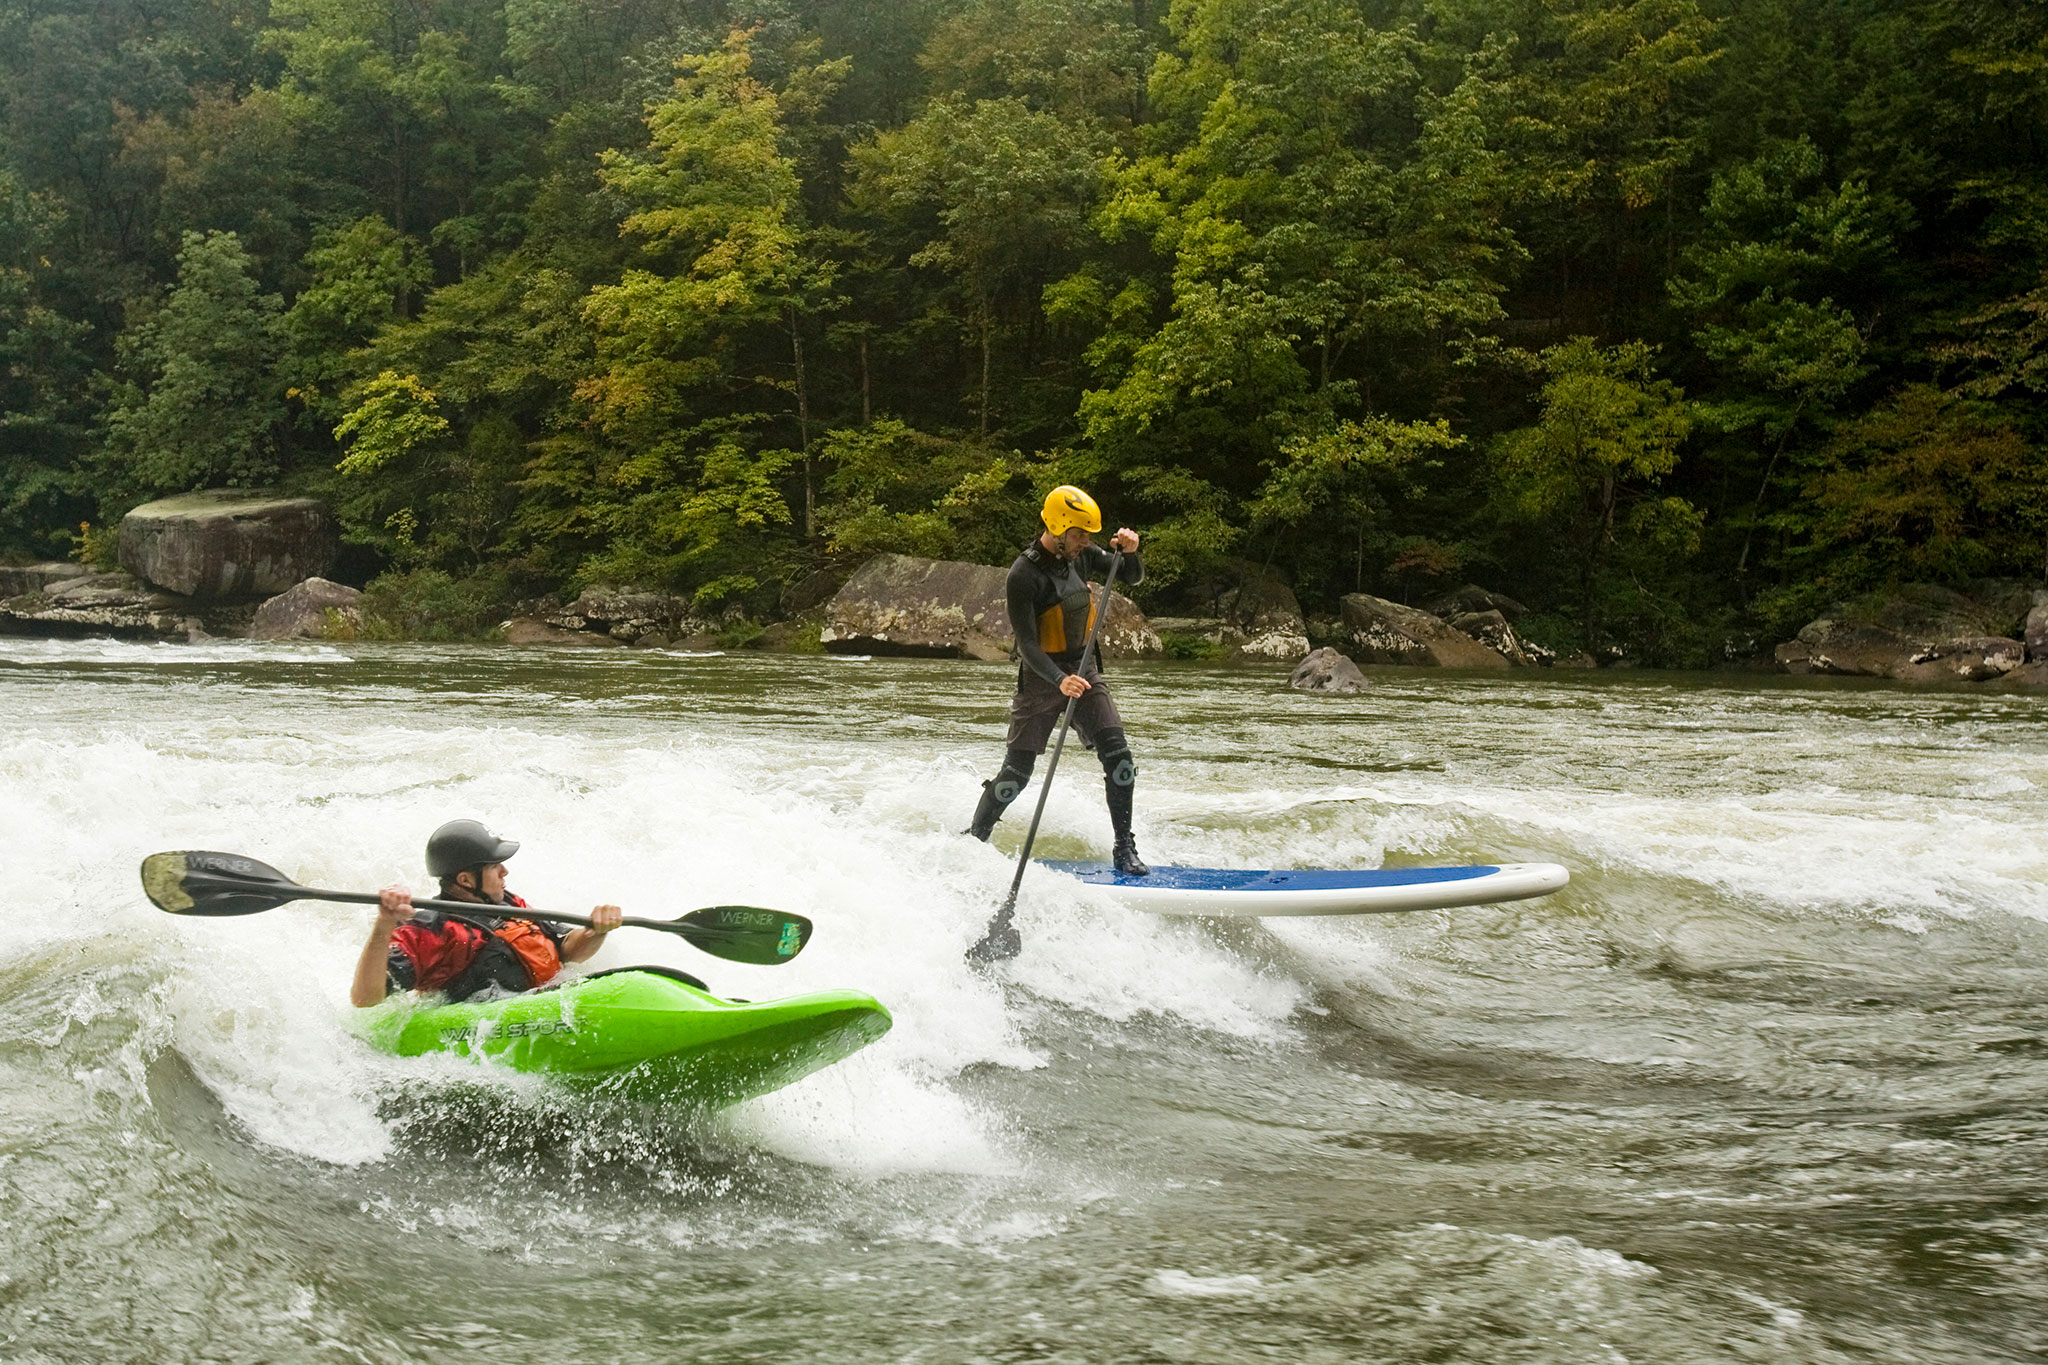 The Best River Surfing Locations in the US